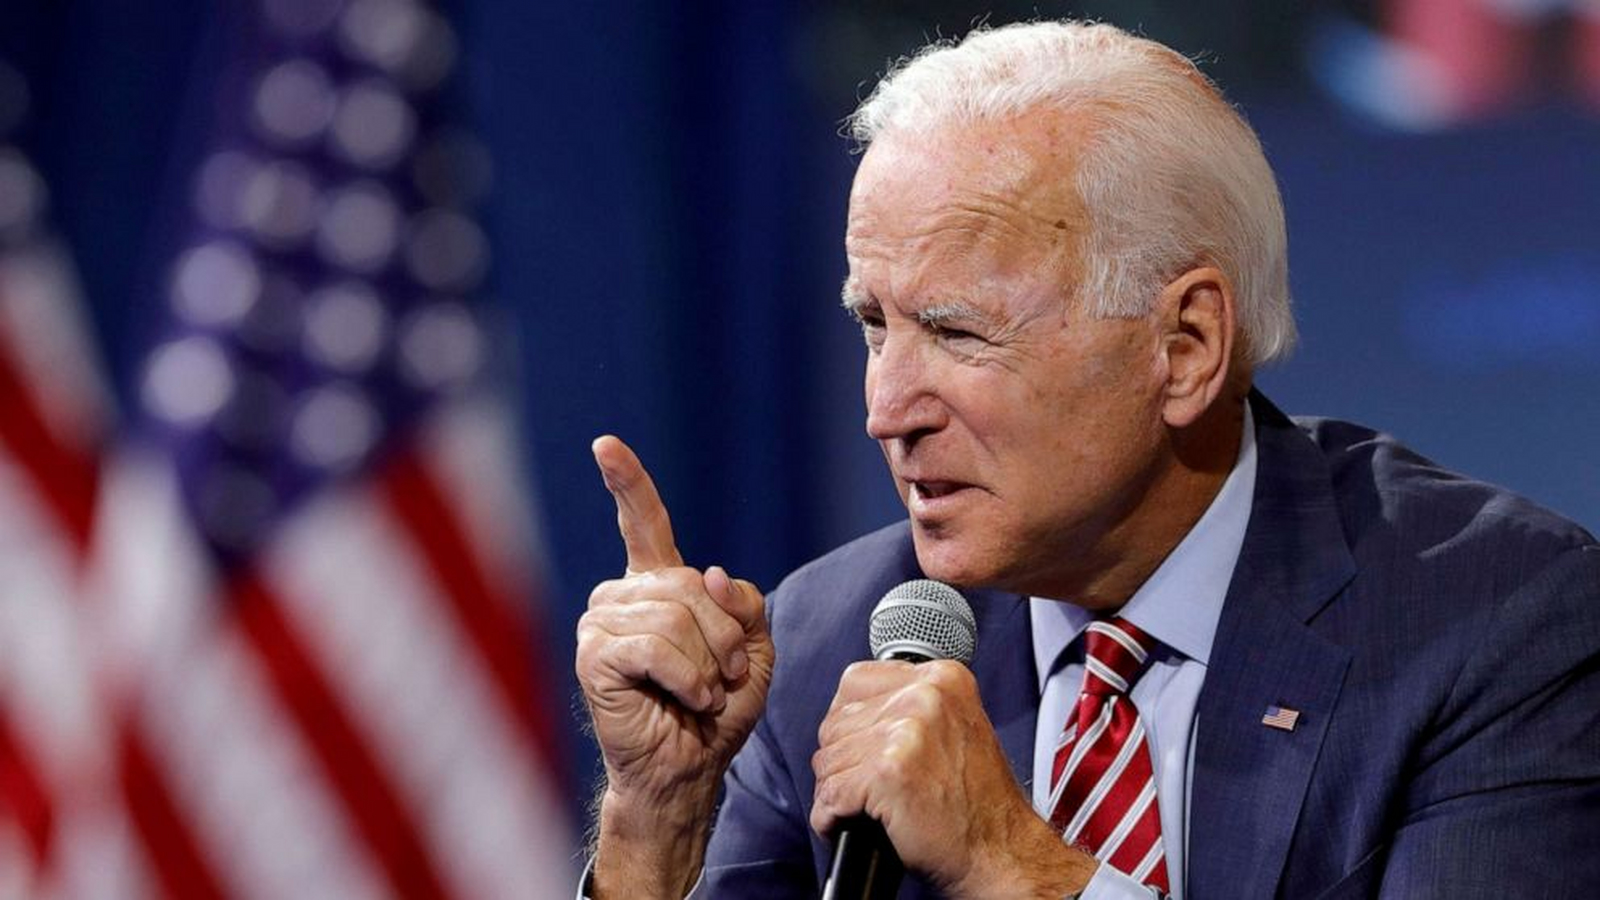 US President Joe Biden has denied having knowledge of the classified documents that his lawyers found in his office at the Penn Biden Center